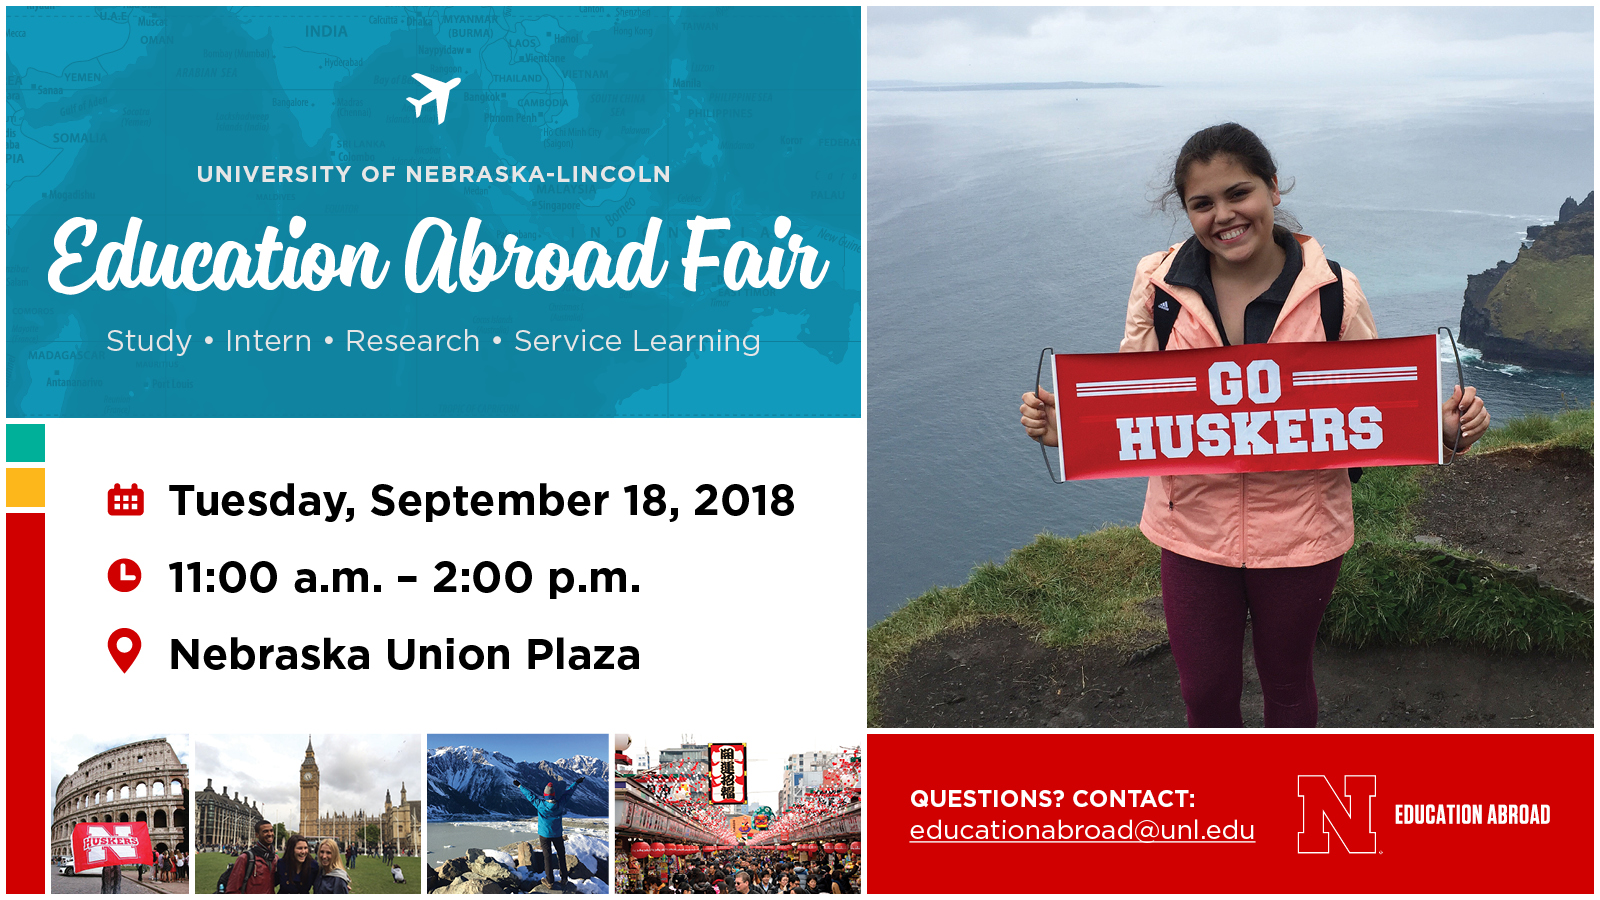 Education Abroad Fair is on Tuesday